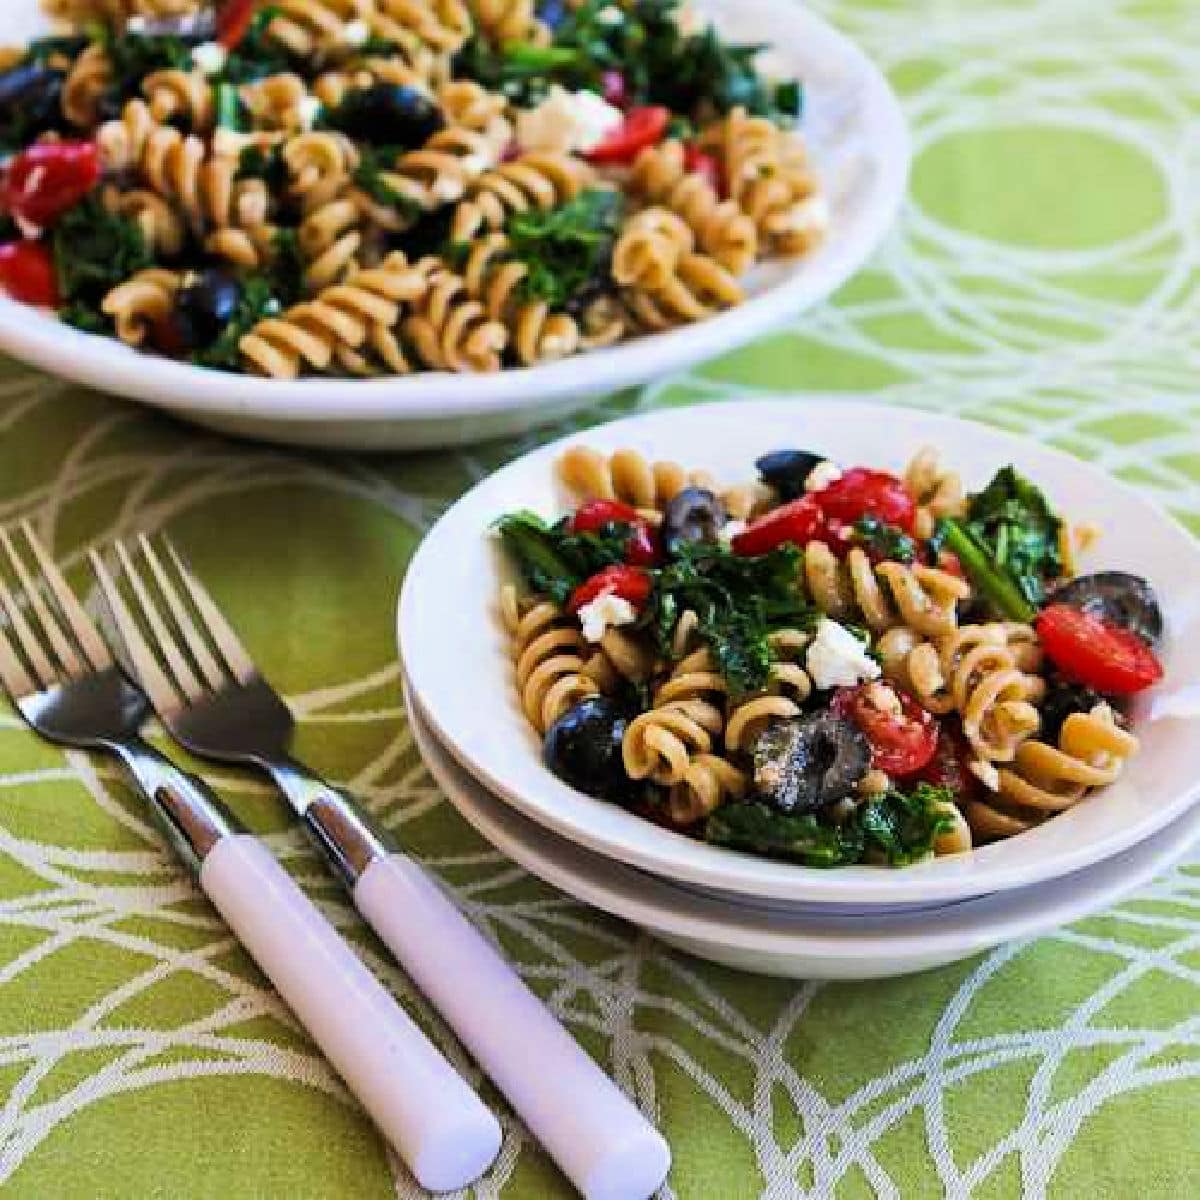 Kale Pasta Salad shown in two serving bowls with forks.